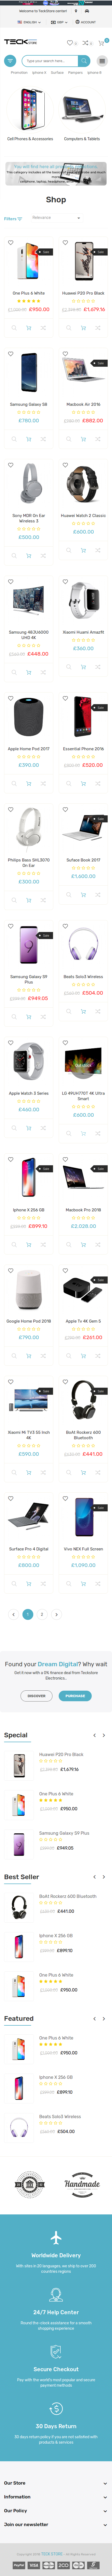 Category page mobile